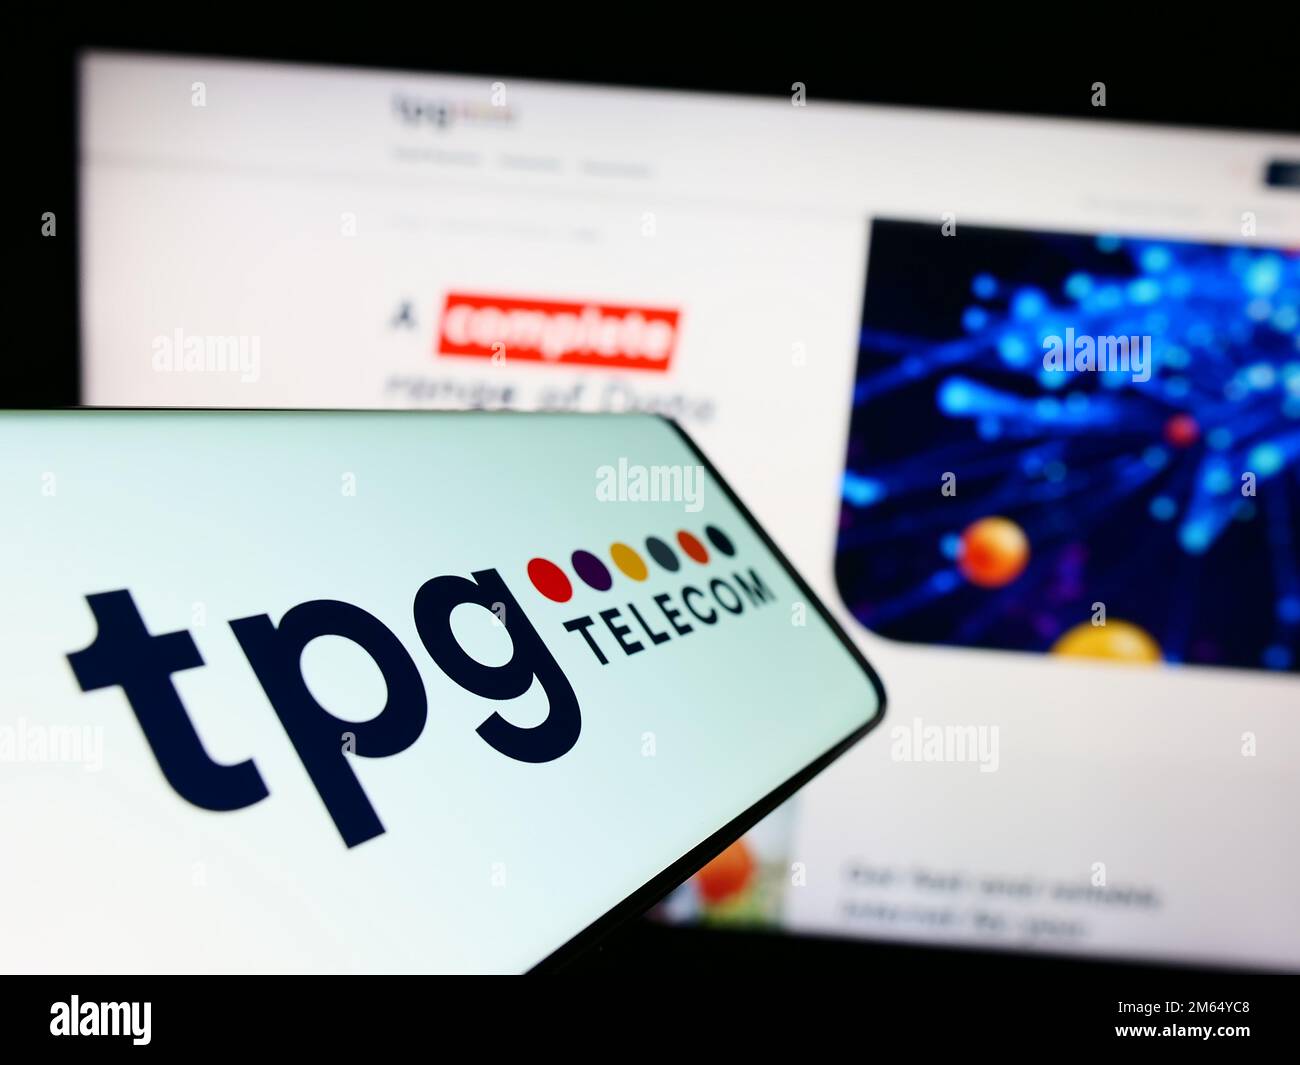 Cellphone with logo of Australian company TPG Telecom Limited on screen in front of business website. Focus on center of phone display. Stock Photo